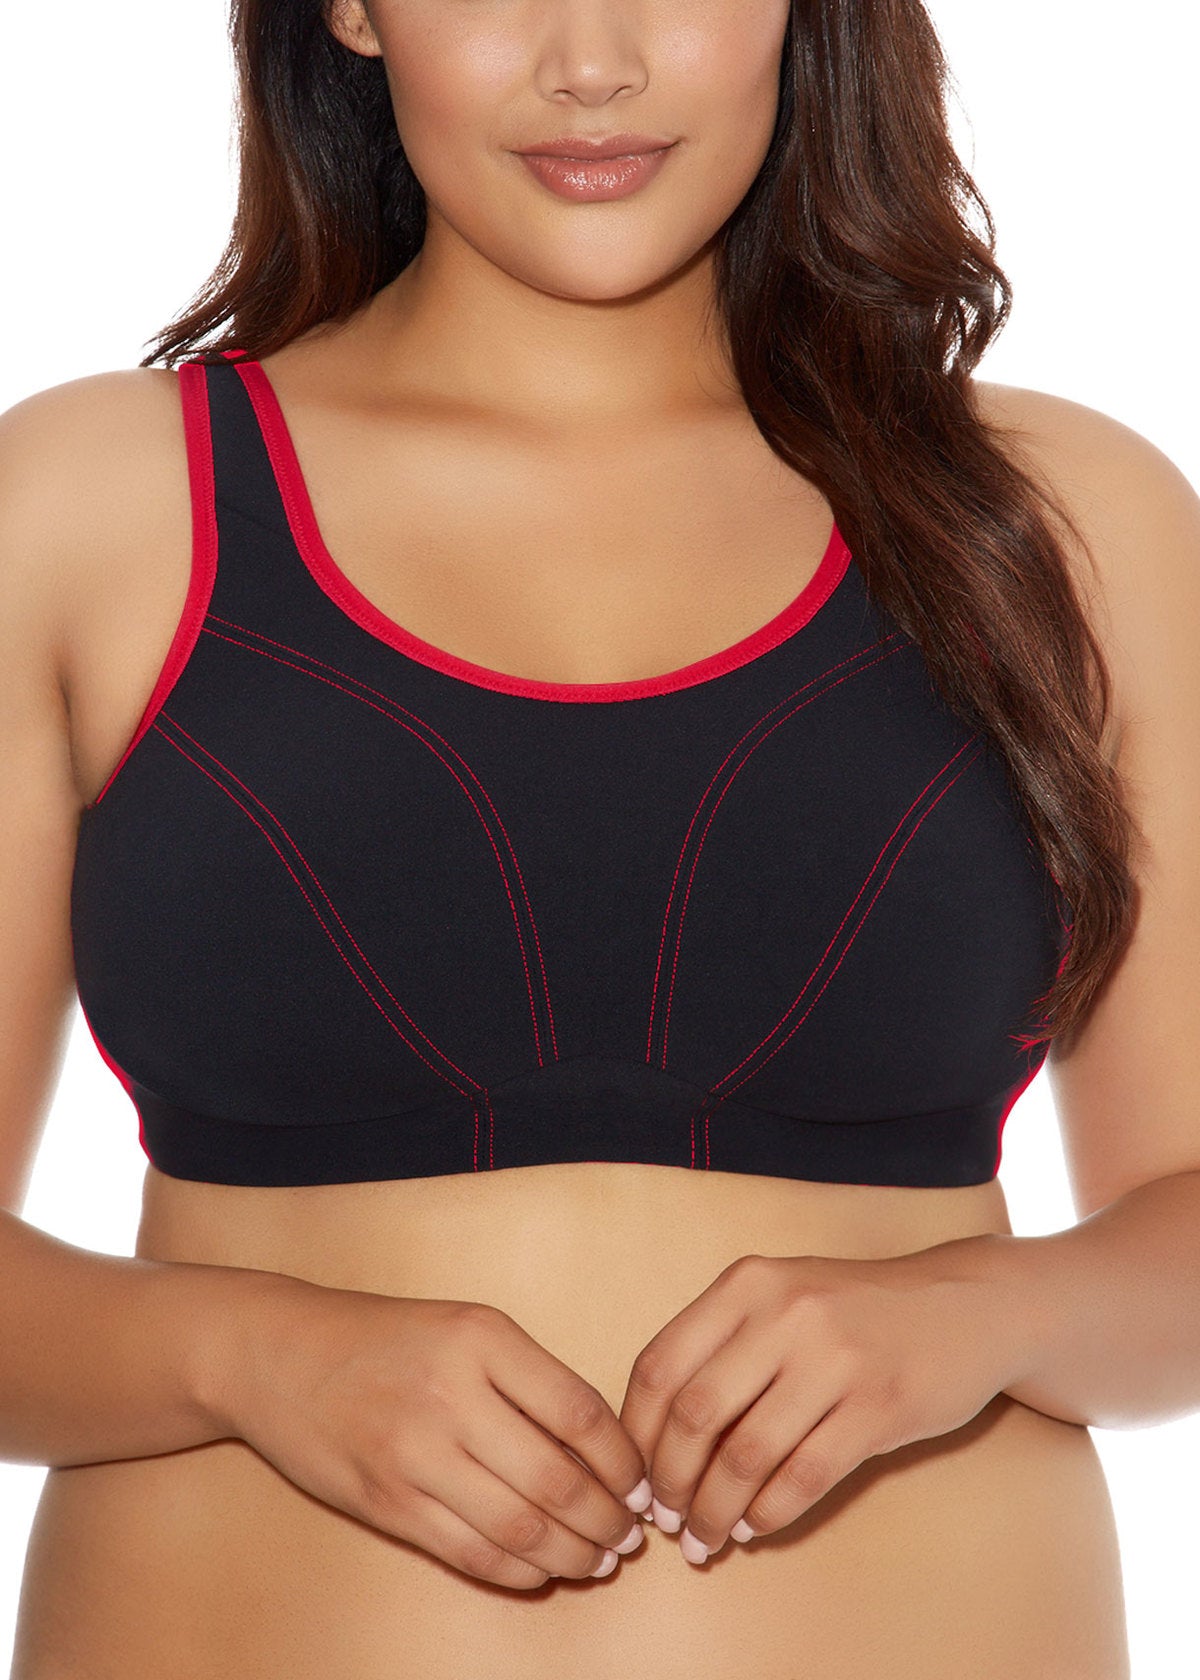 Non Wired Sports Bra - Black worn by model front view